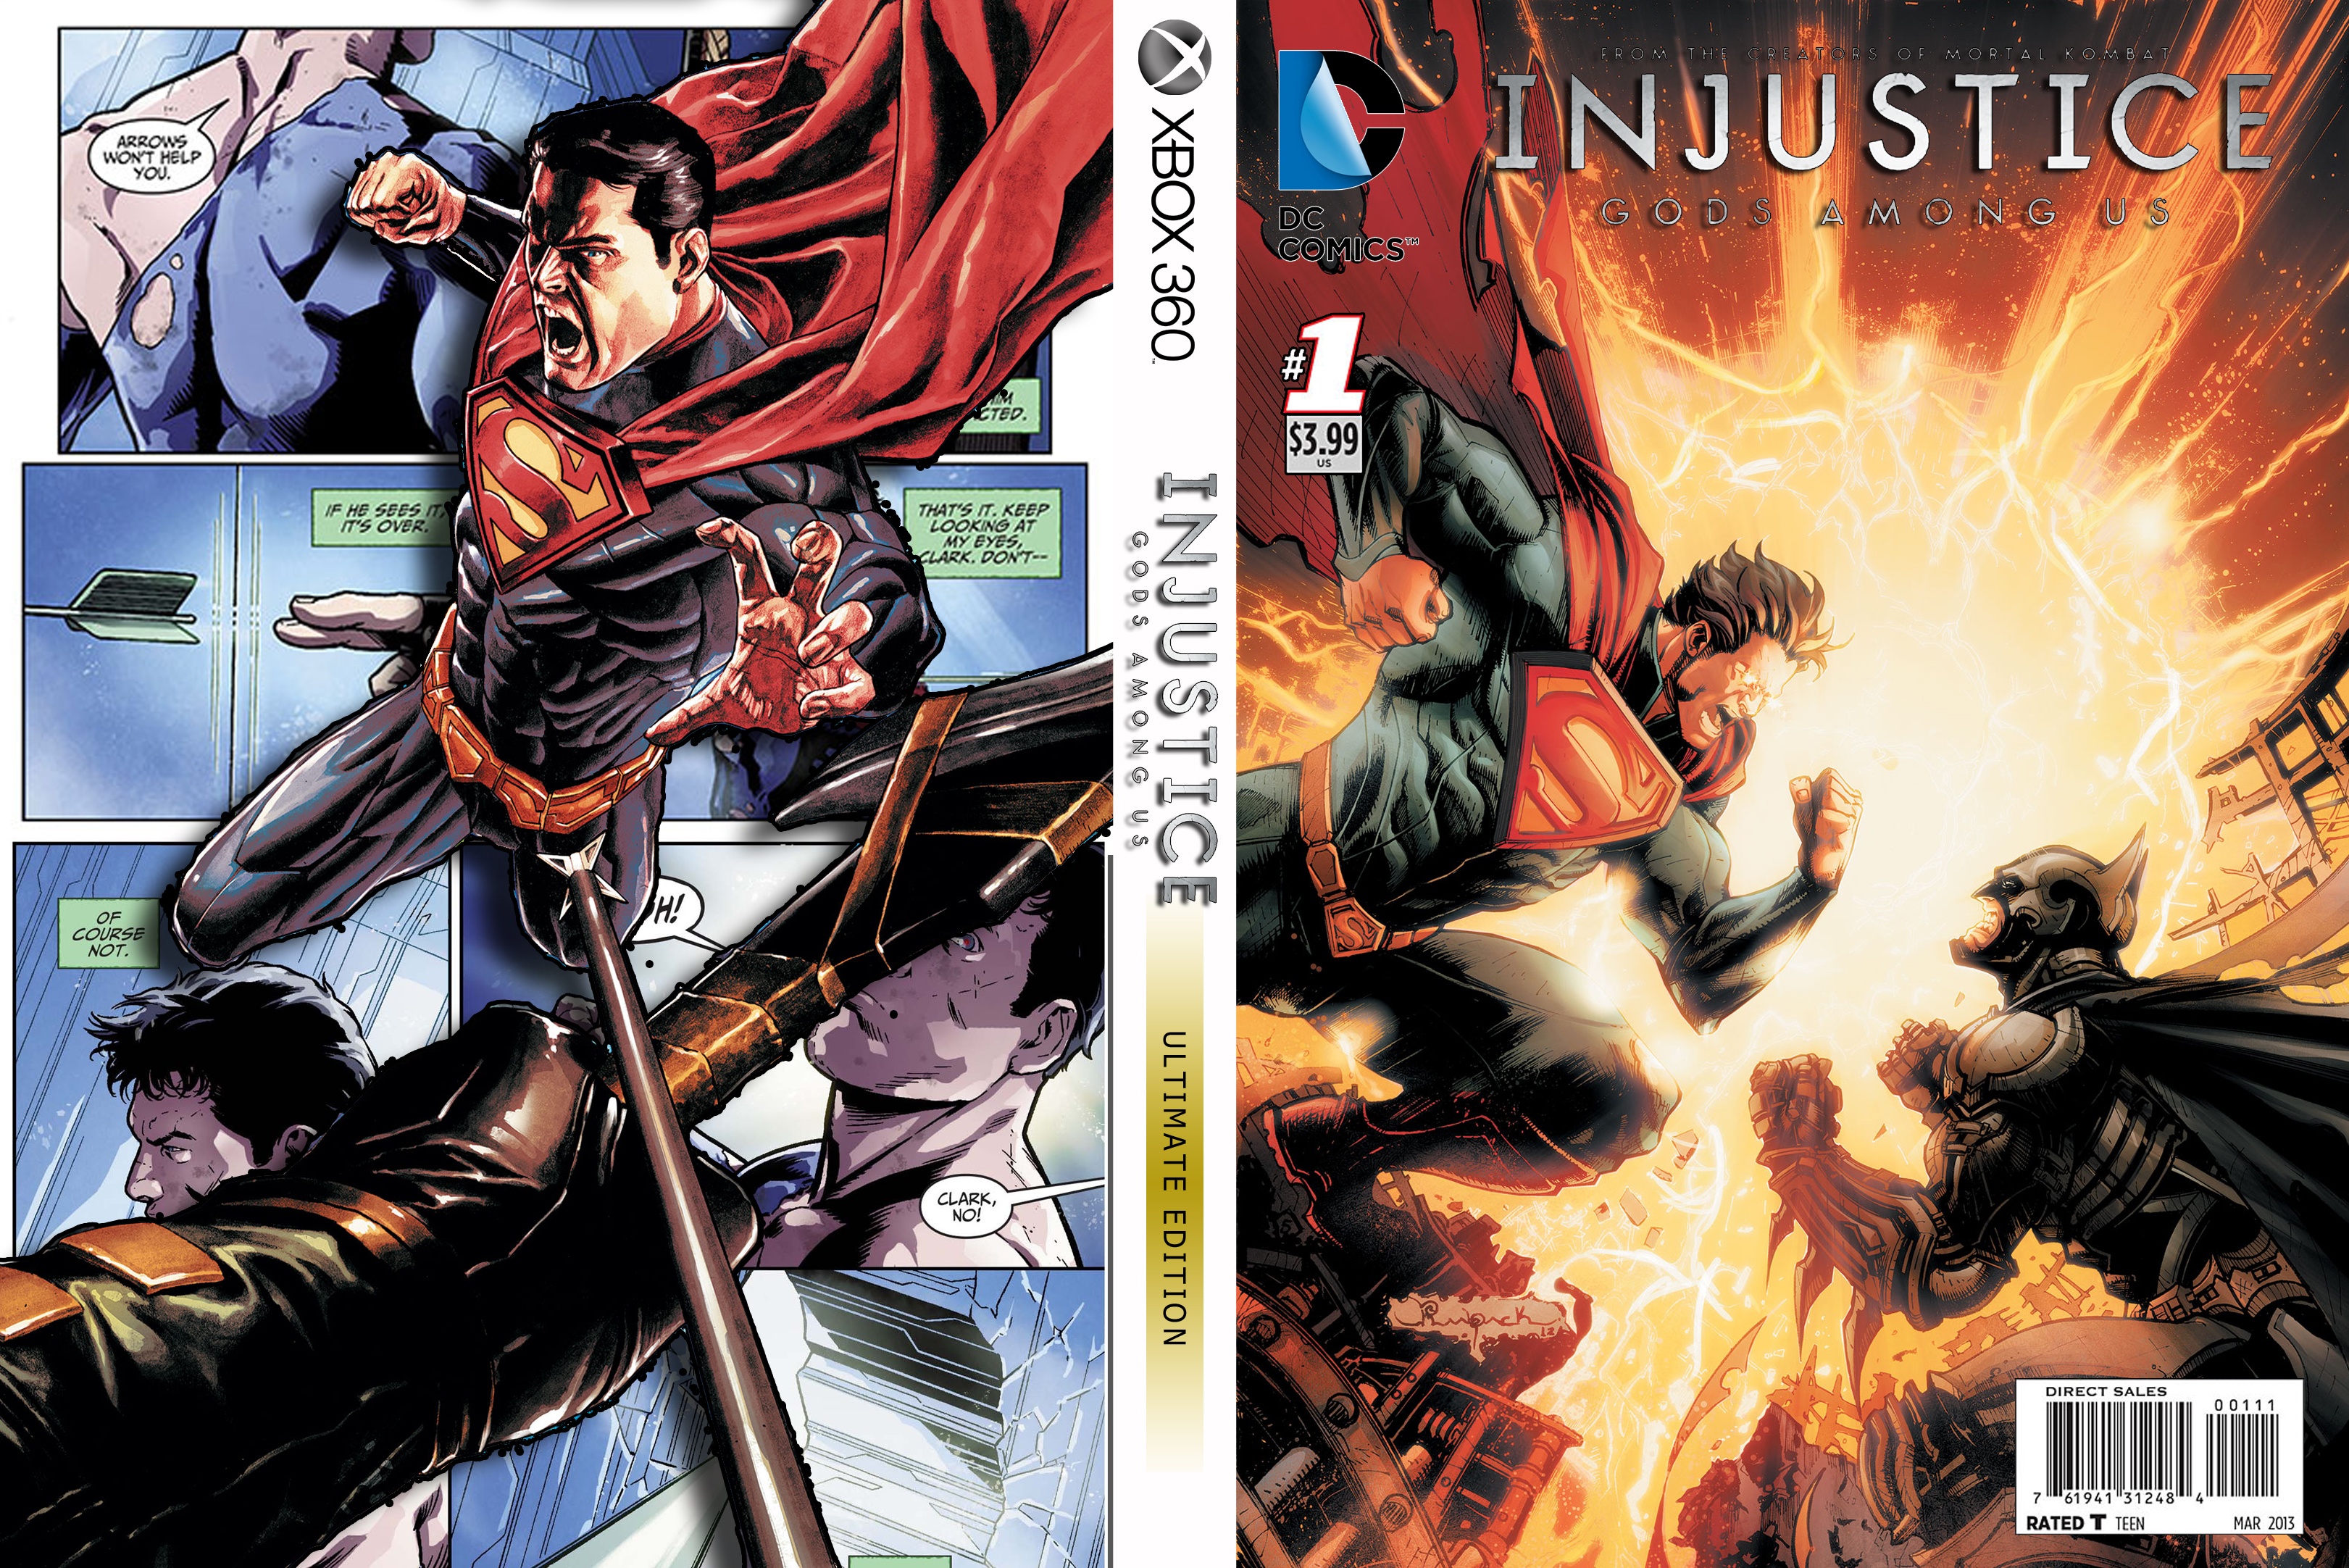 Injustice Gods Among Us: Ultimate Edition box cover